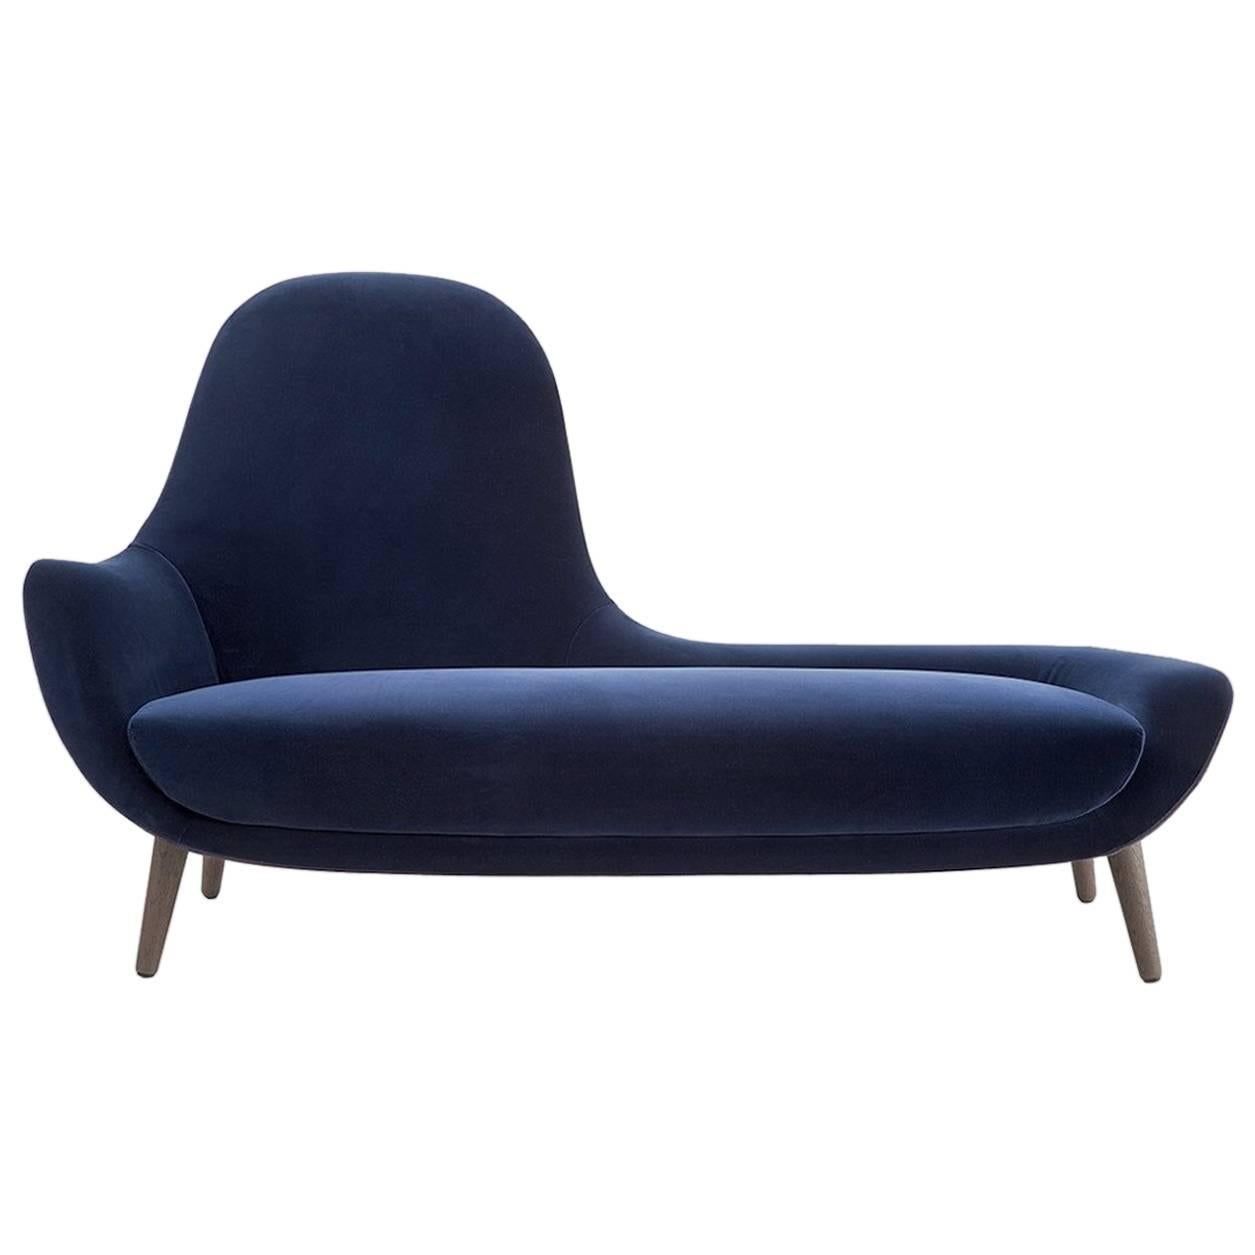 Mad Chaise Longue by Marcel Wanders for Poliform in Fabric or Leather For Sale